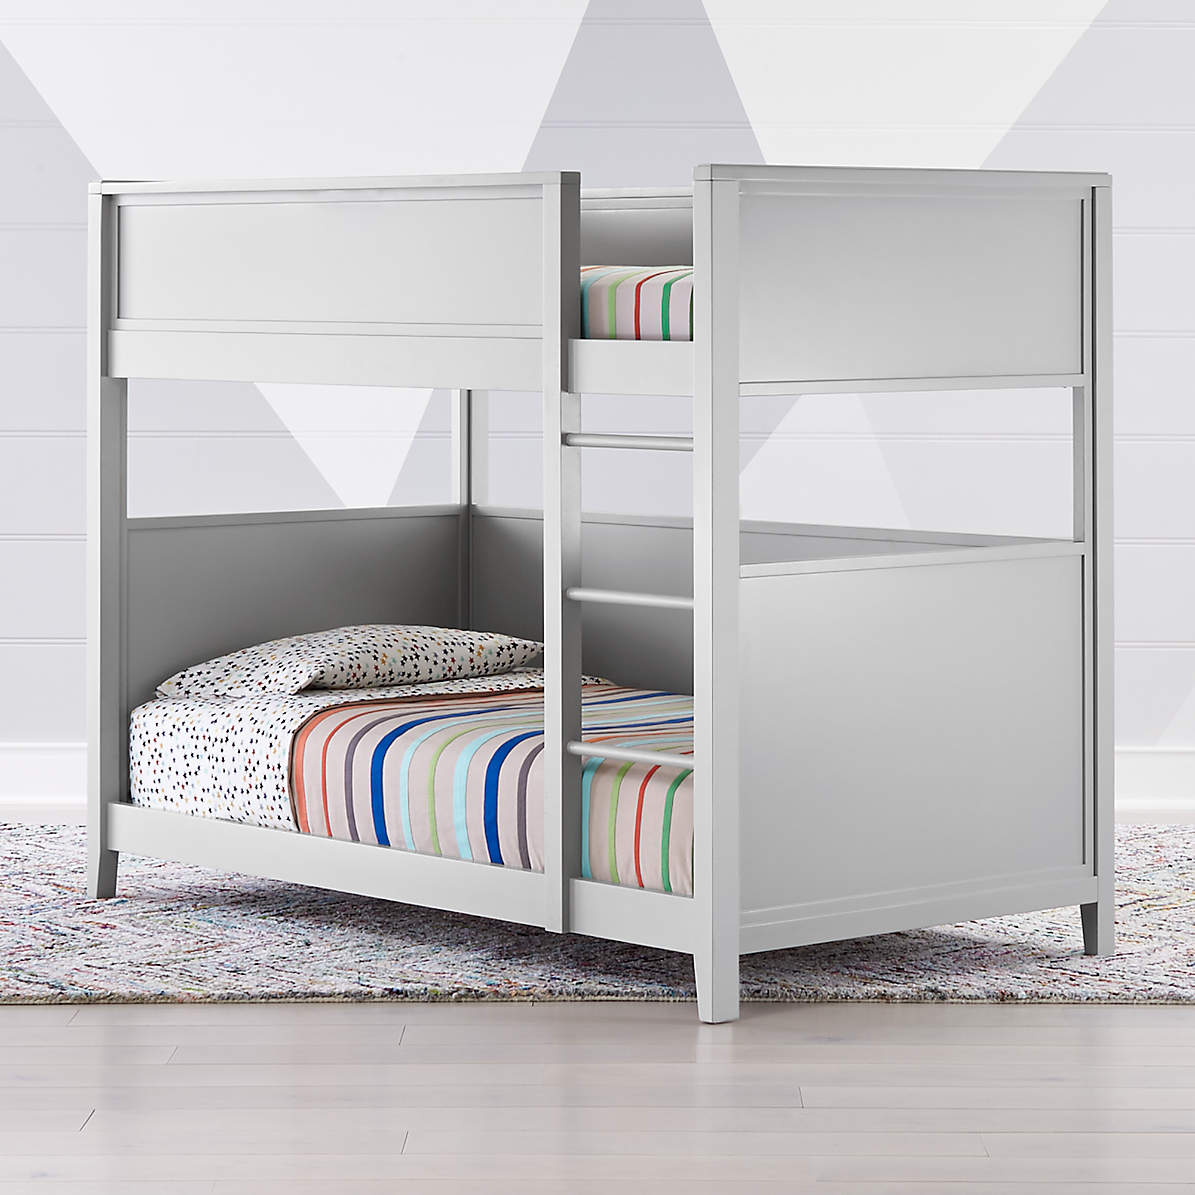 Small Space Kids Twin Bunk Bed, Bunk Beds Bunk Beds